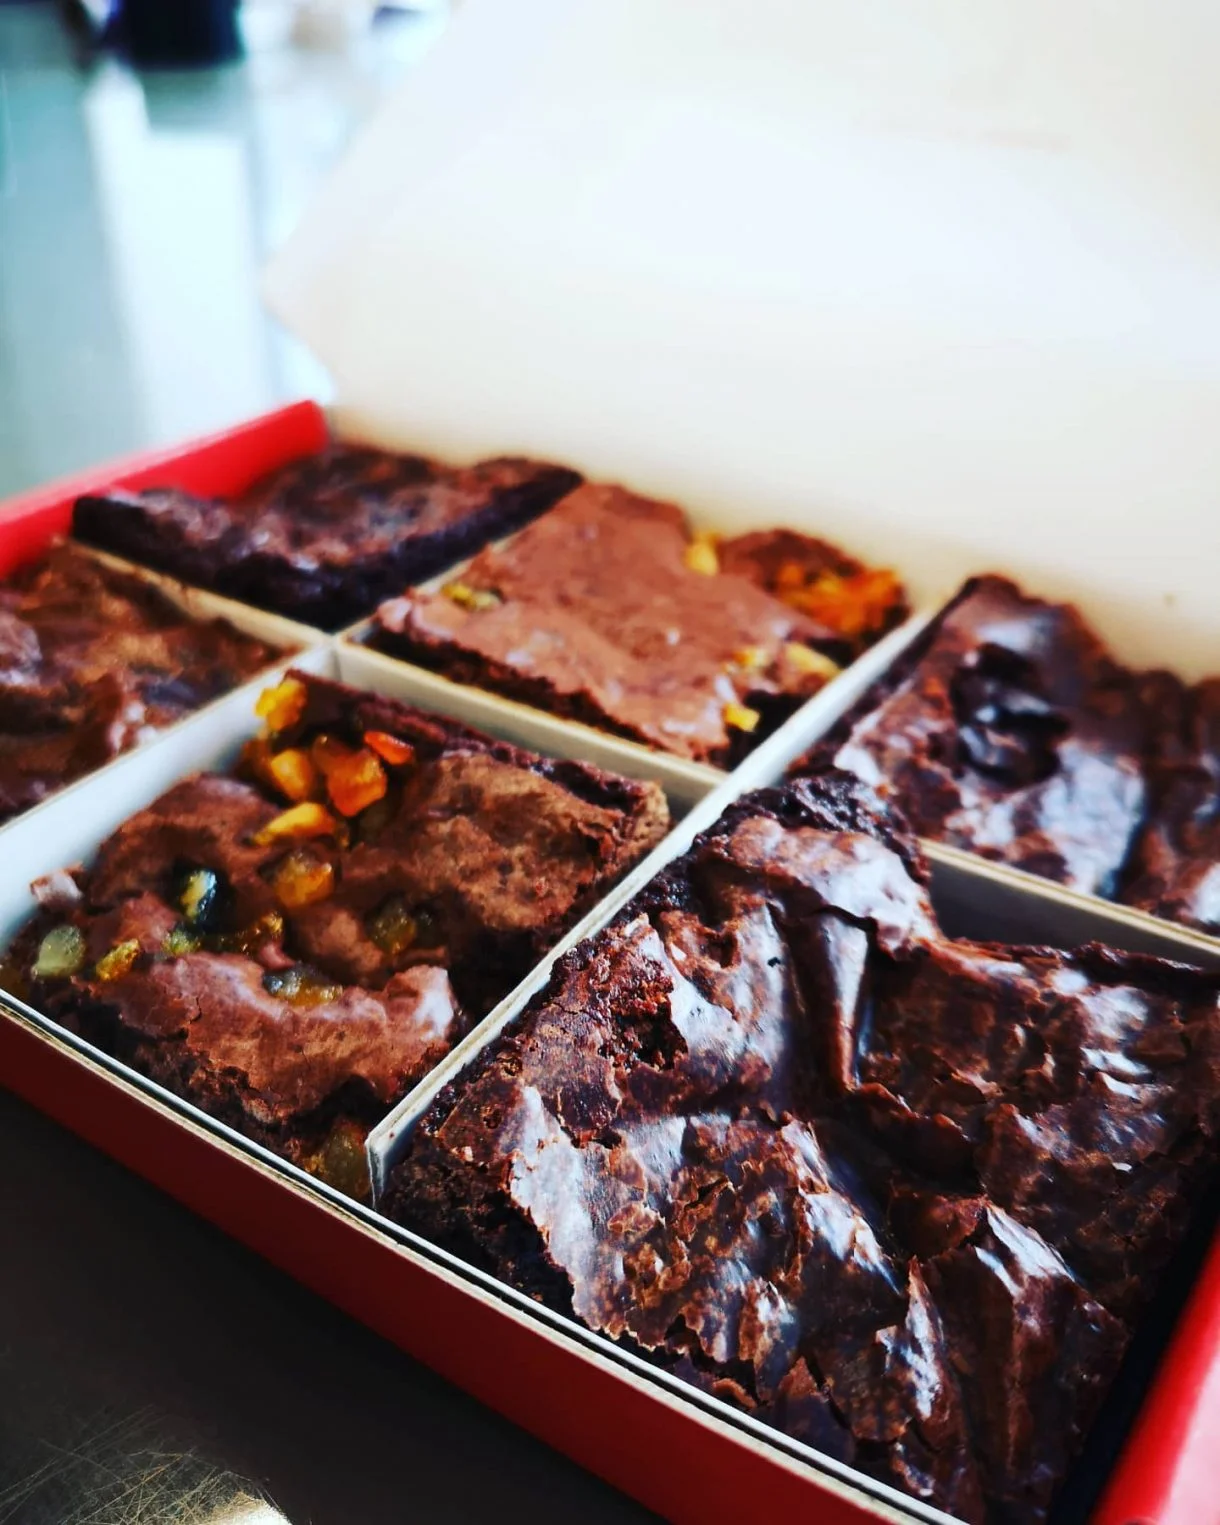 luxury brownies delivered through your letter box throughout the UK